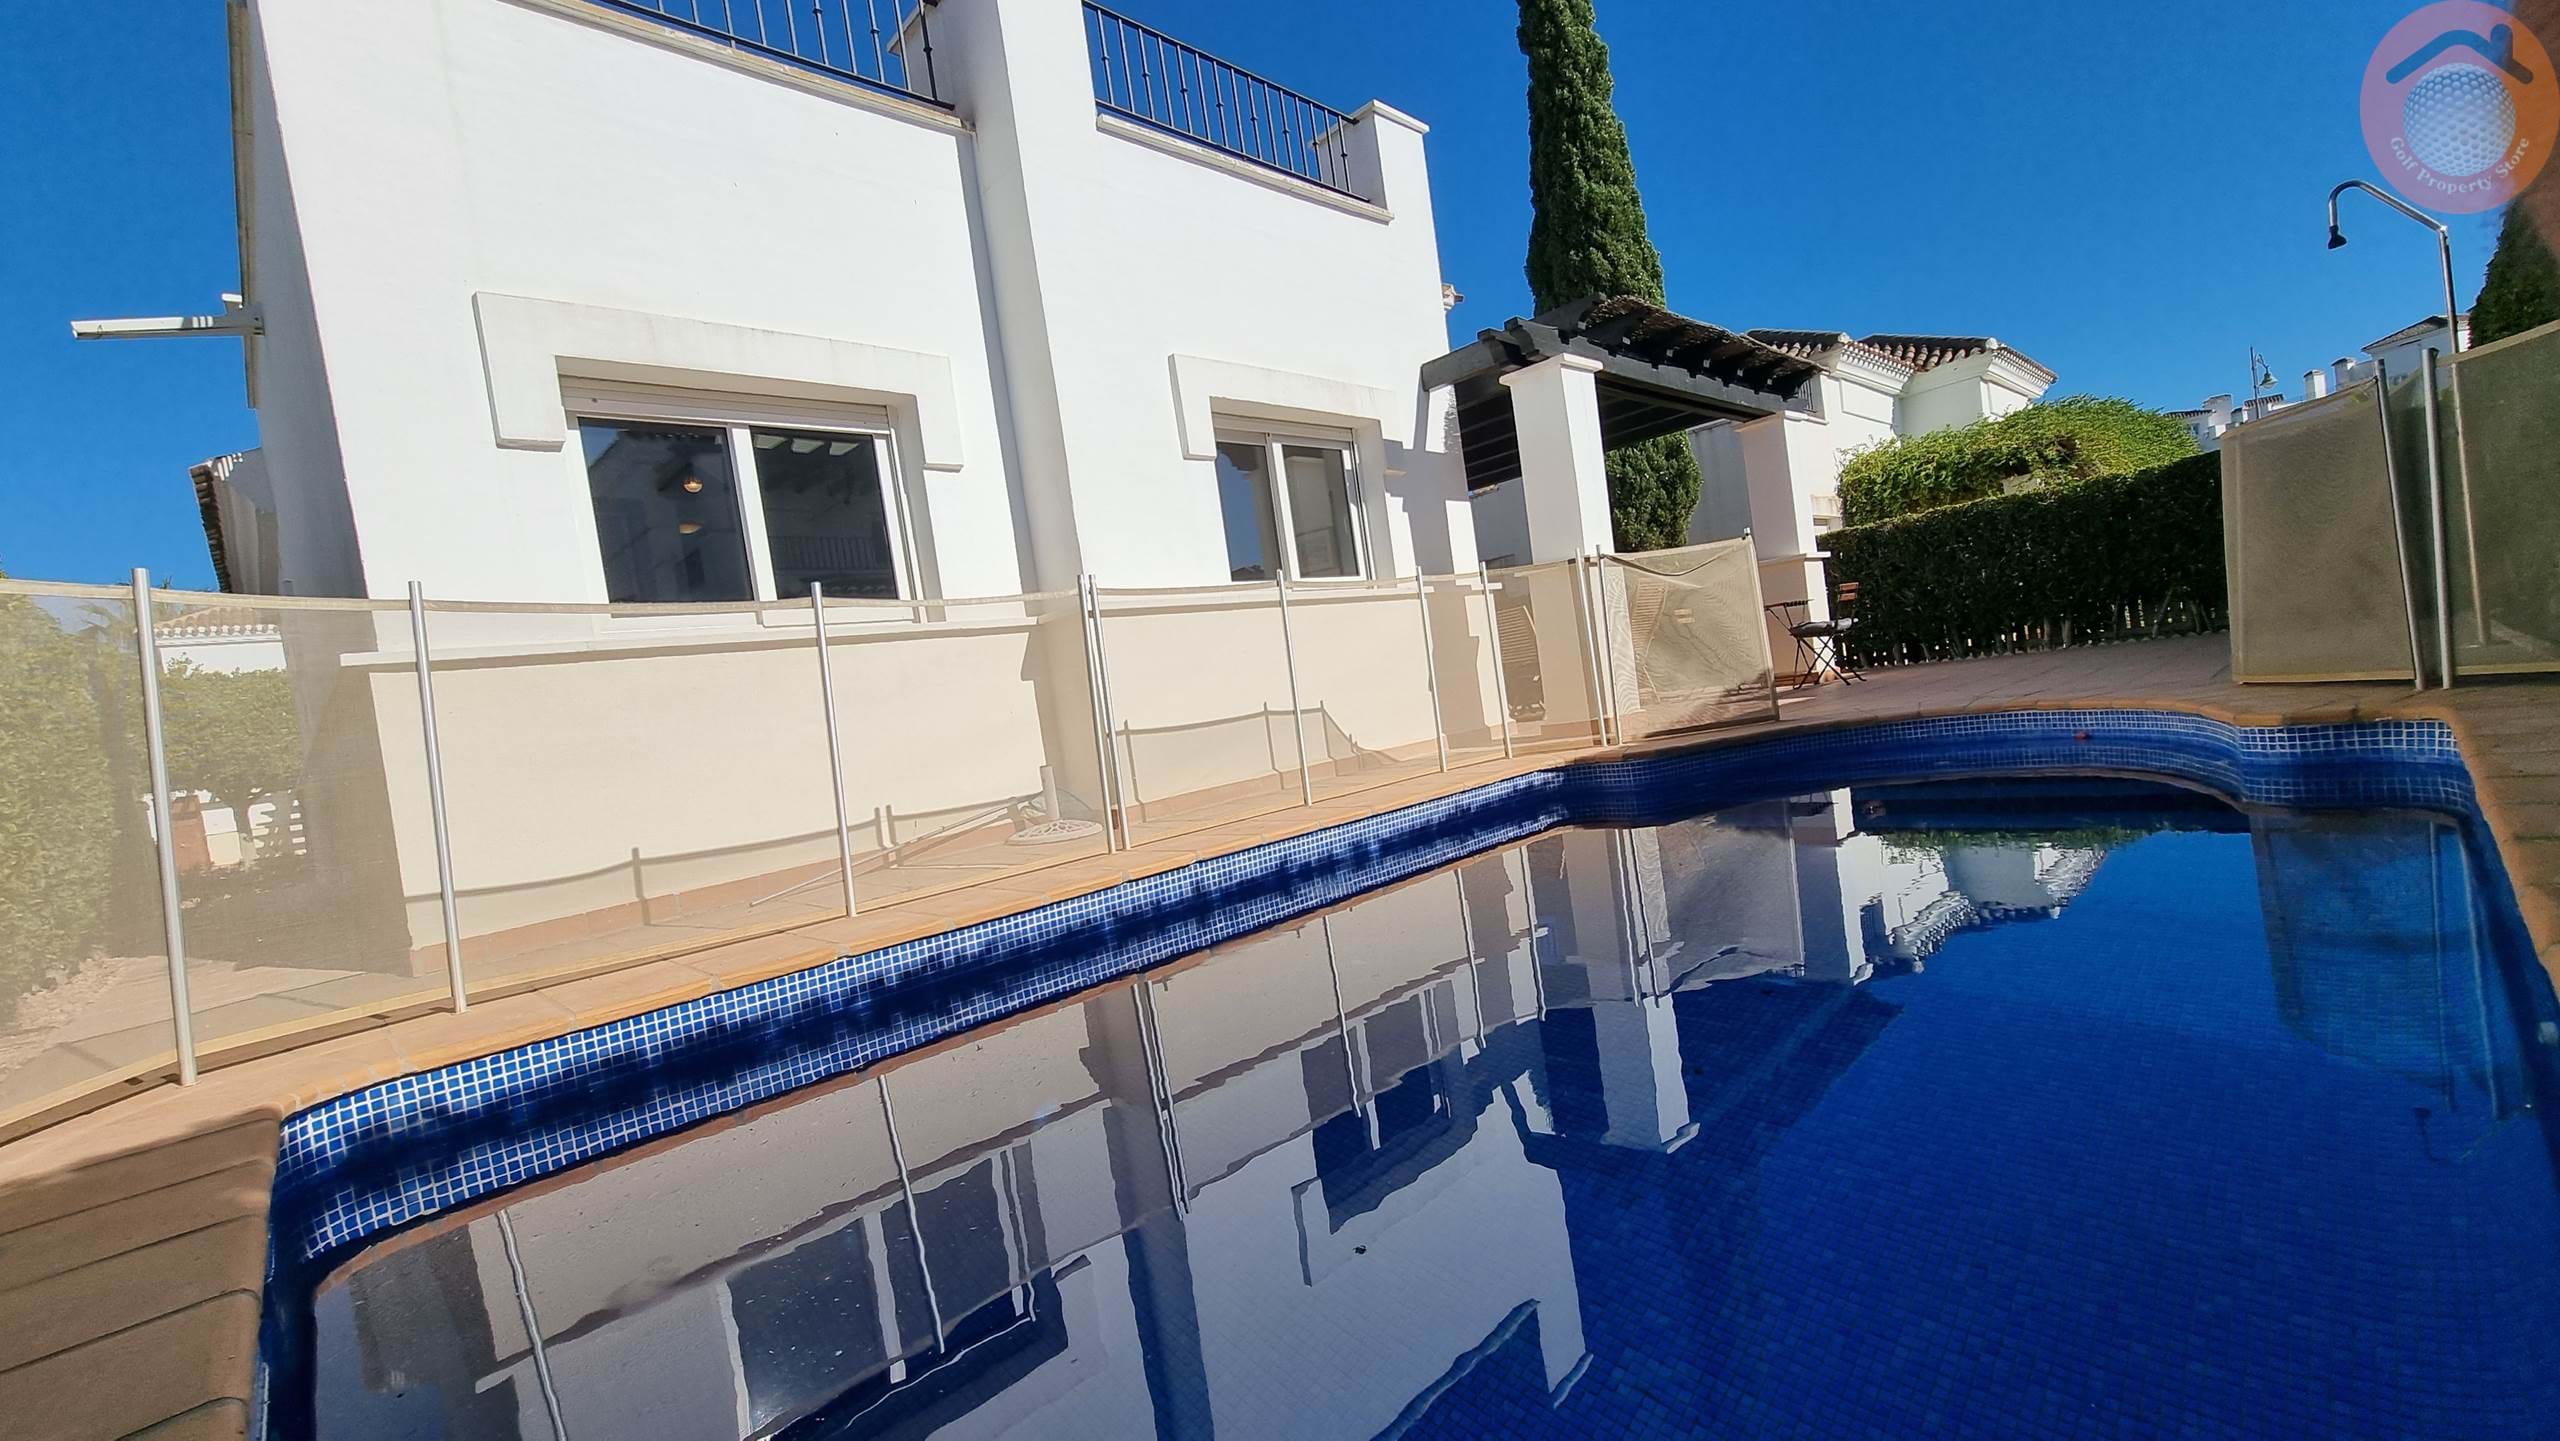 LA TORRE GOLF RESORT  VILLA WITH SOUTH FACING GARDEN & POOL NEXT TO TOWN CENTRE 